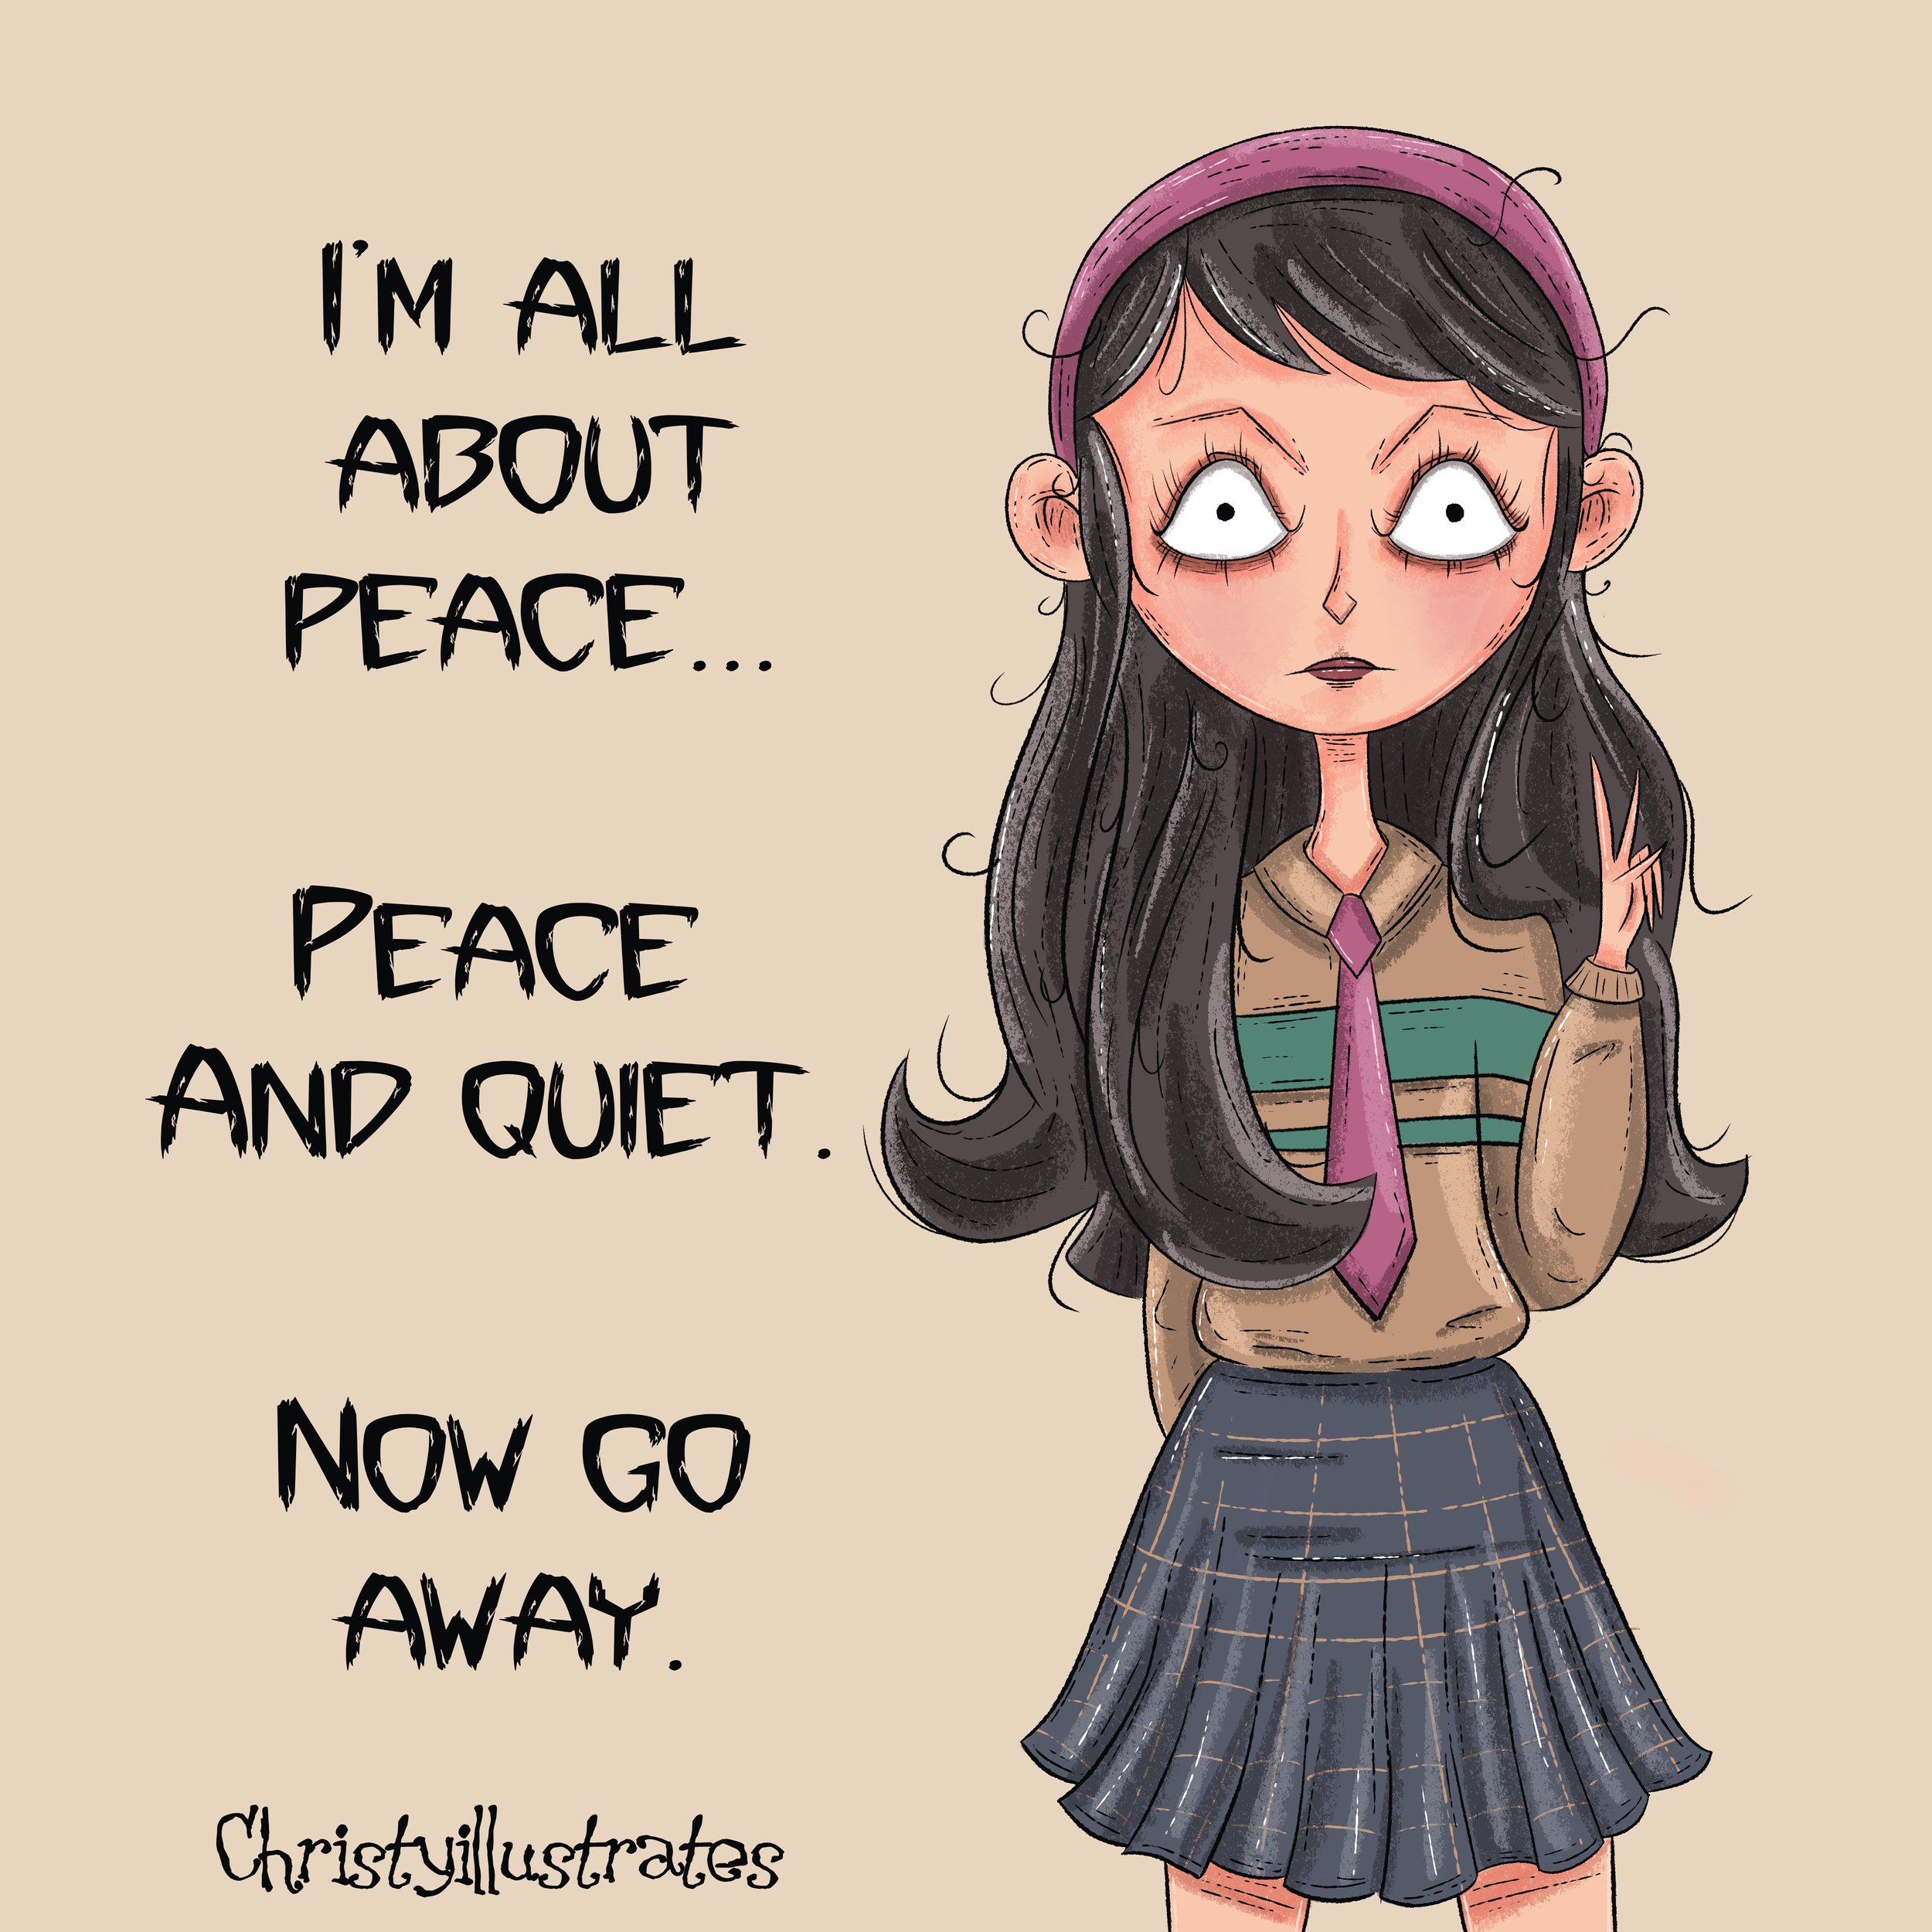 sassy-girl-with-attitude-wanting-peace-and-quiet.JPG